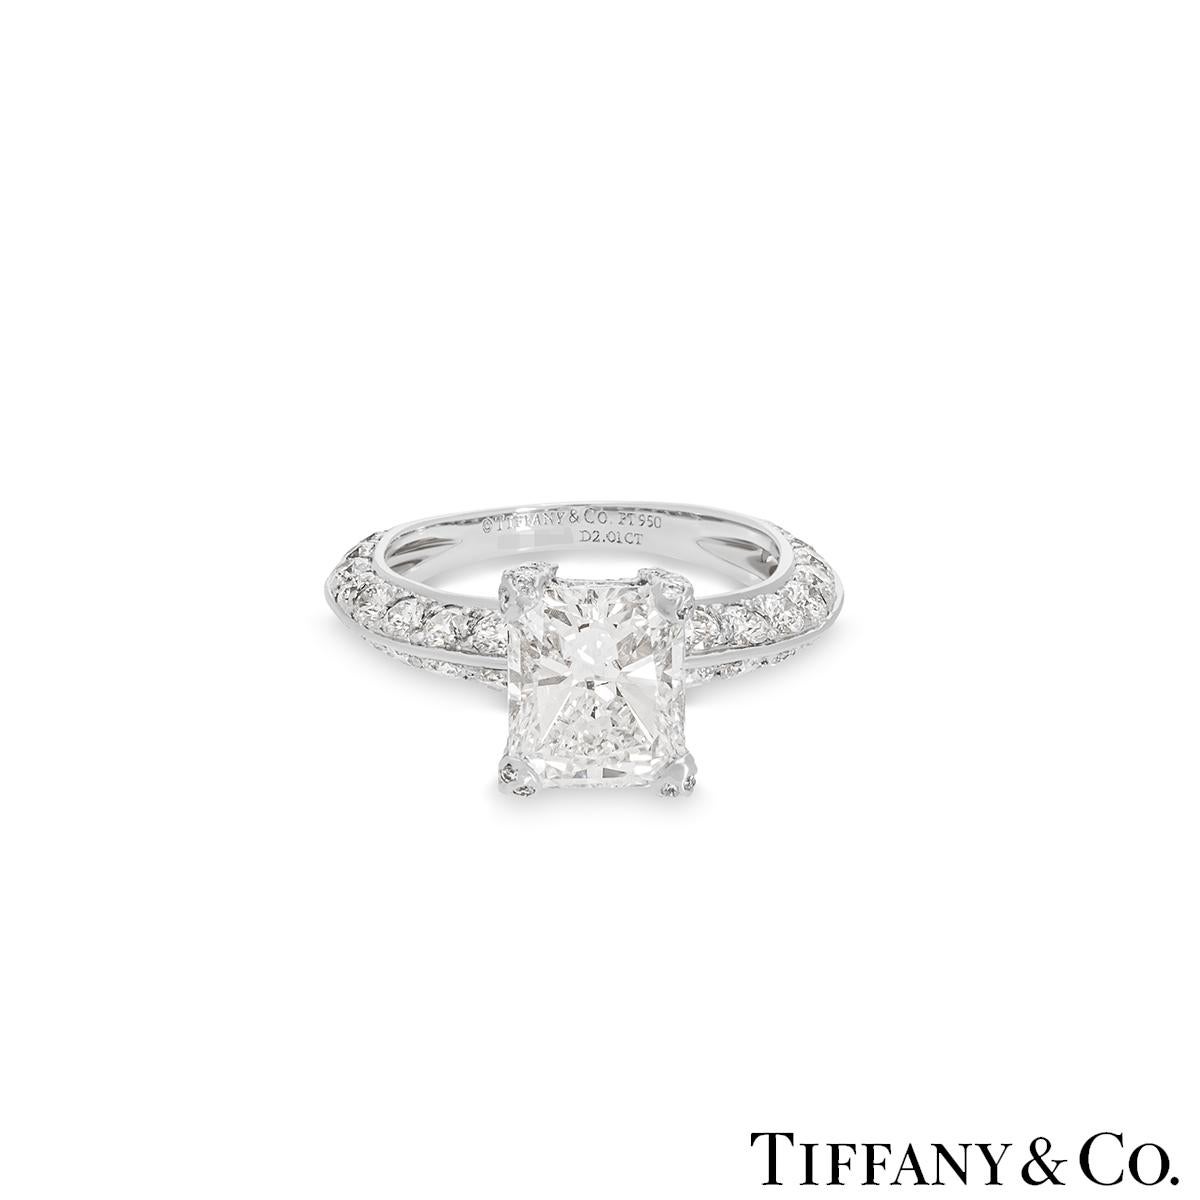 Women's GIA Certified Tiffany & Co. Platinum Radiant Cut Diamond Ring 2.01 Carat G/IF For Sale